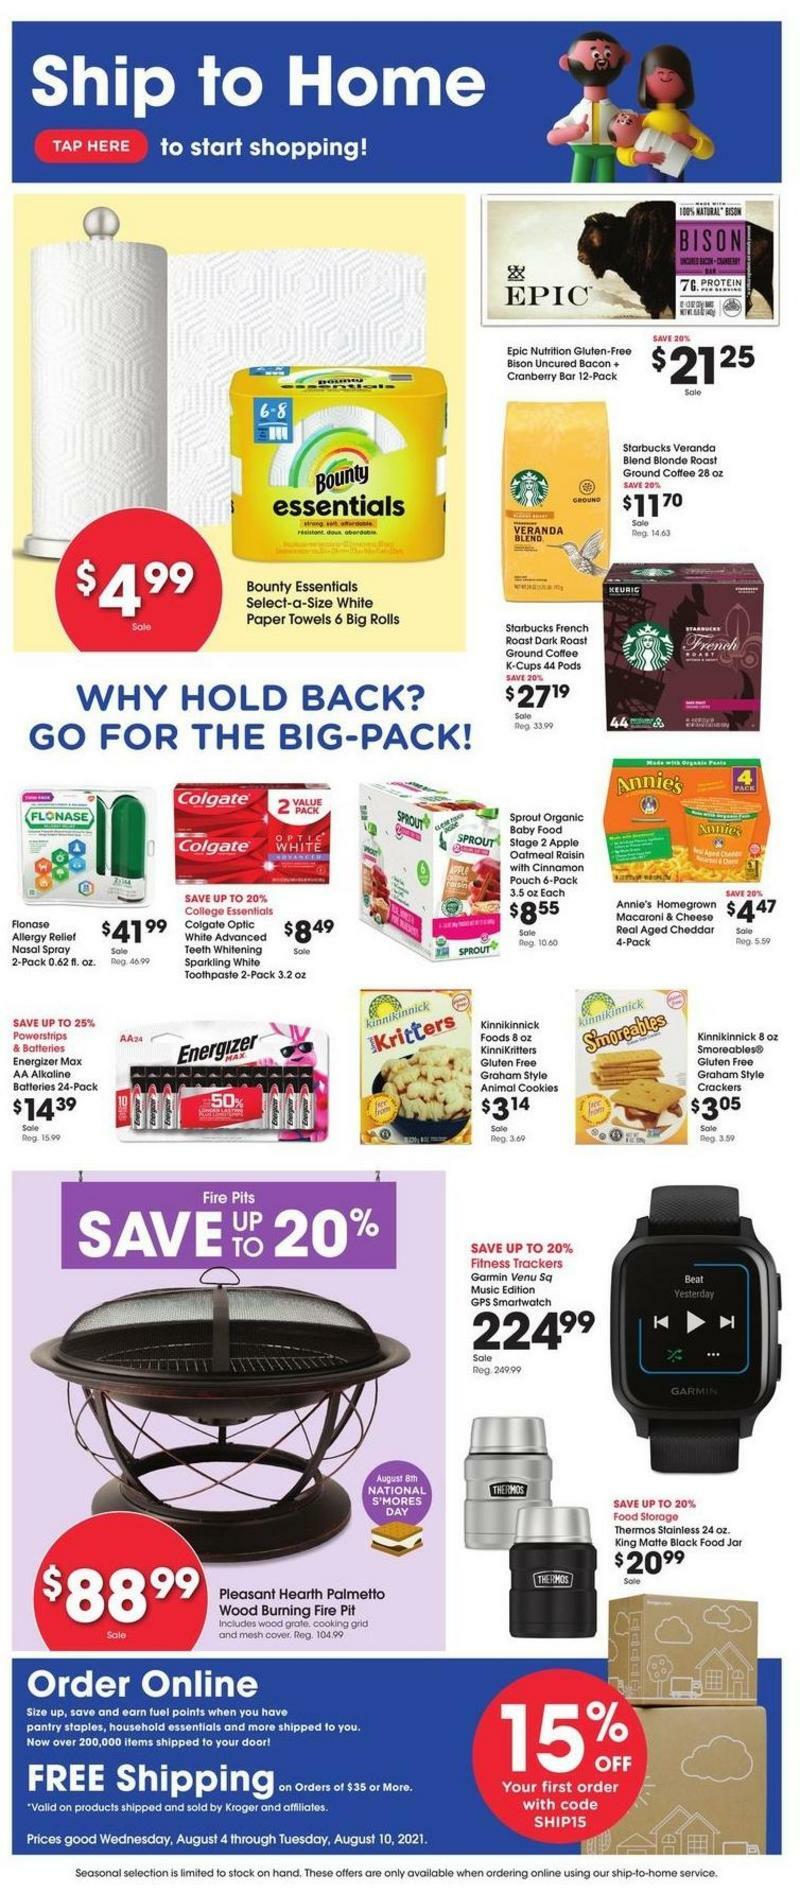 City Market Ship to Home Weekly Ad from August 4